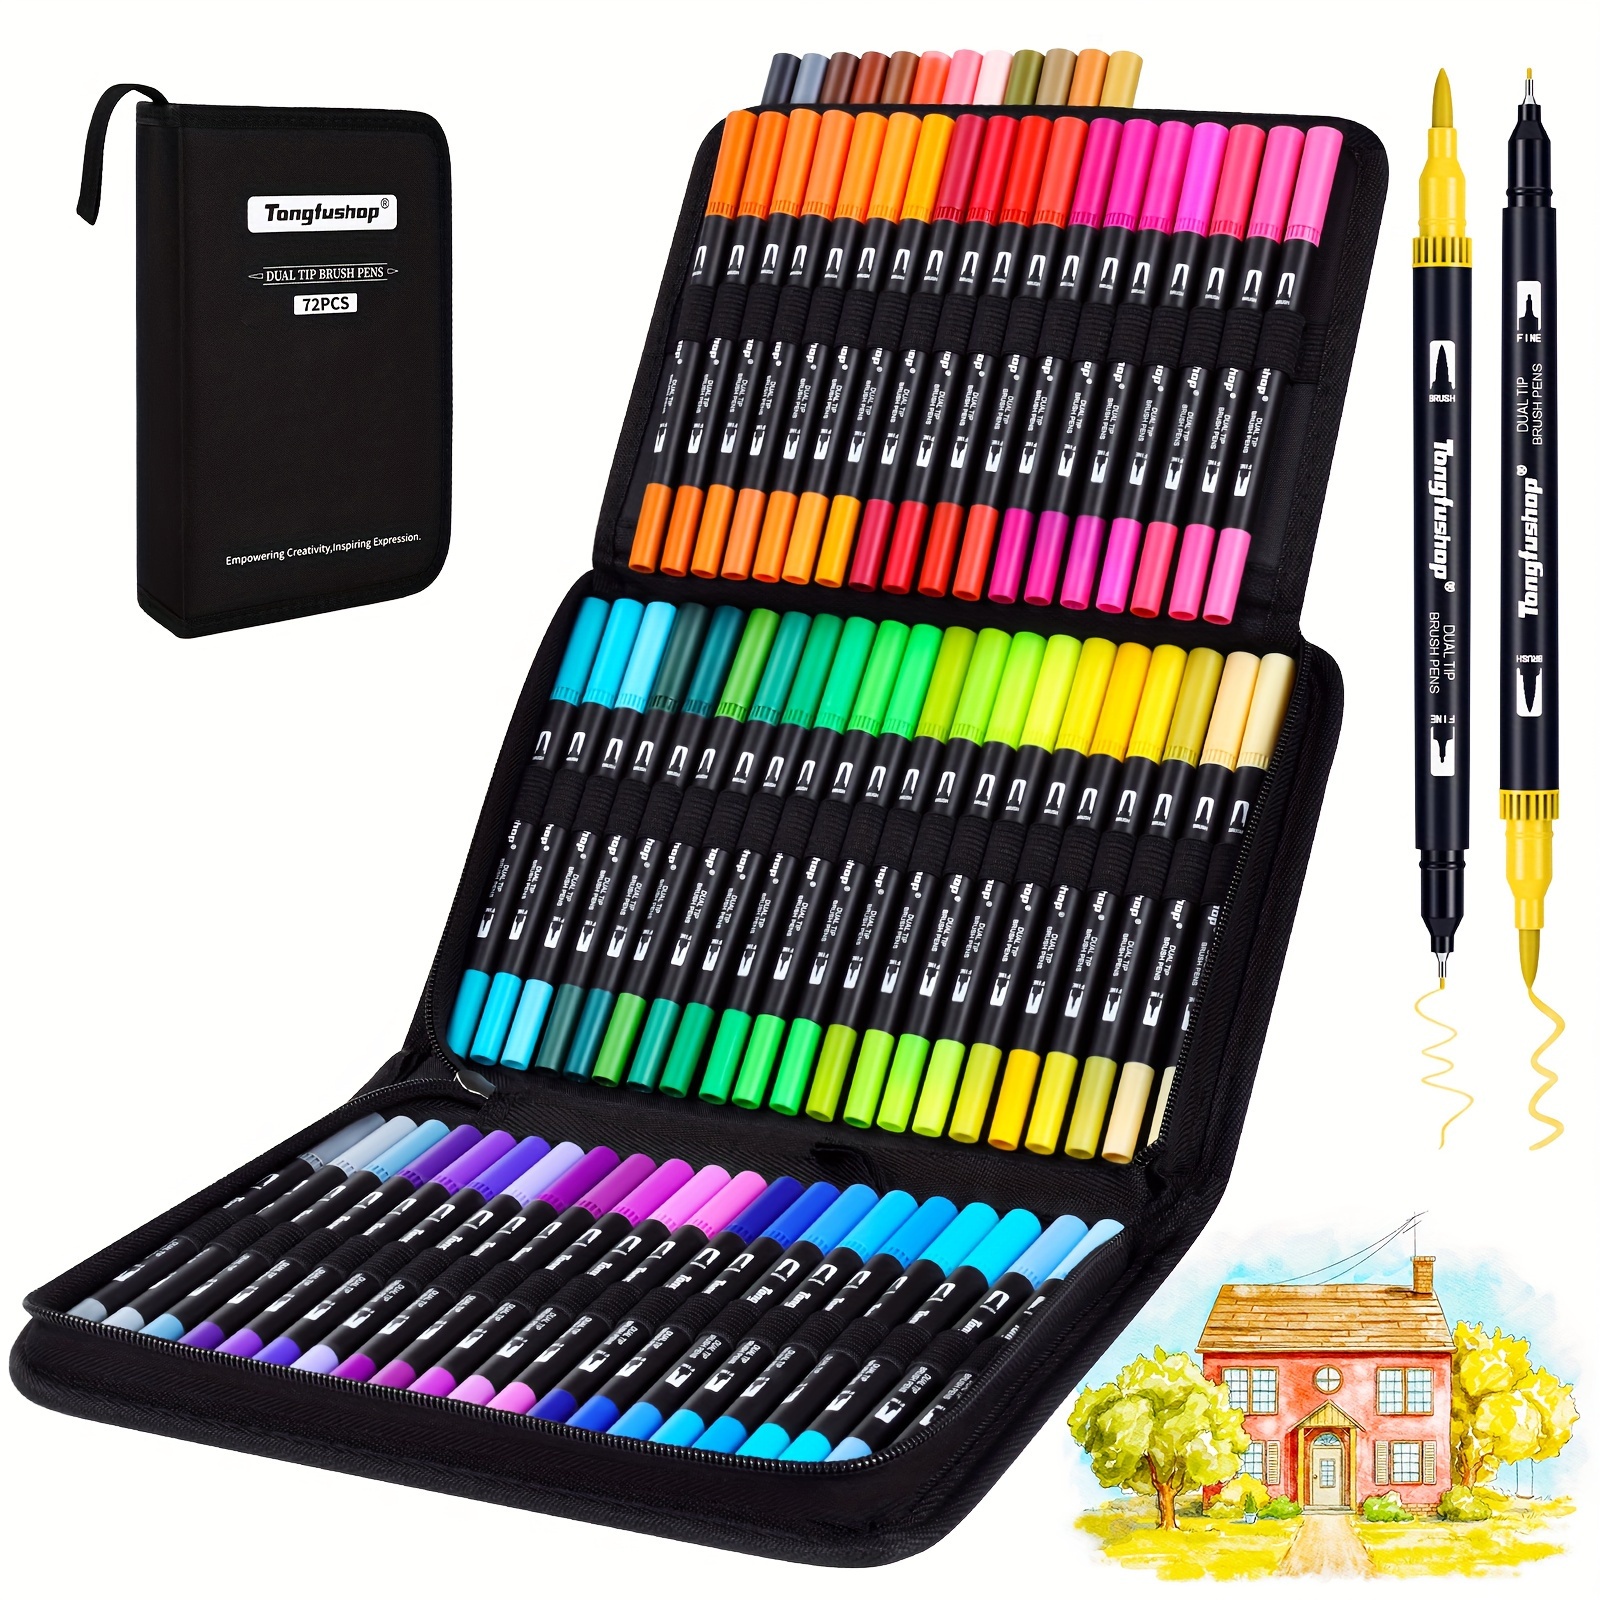 

Tongfushop 72 Colors Dual Tip Brush Markers, Brush And Fineliner Coloring Brush Pens Set, Art Pen For Art Beginner Coloring Books, Christmas Cards Drawing, Lettering, Calligraphy, Journaling, Doodling